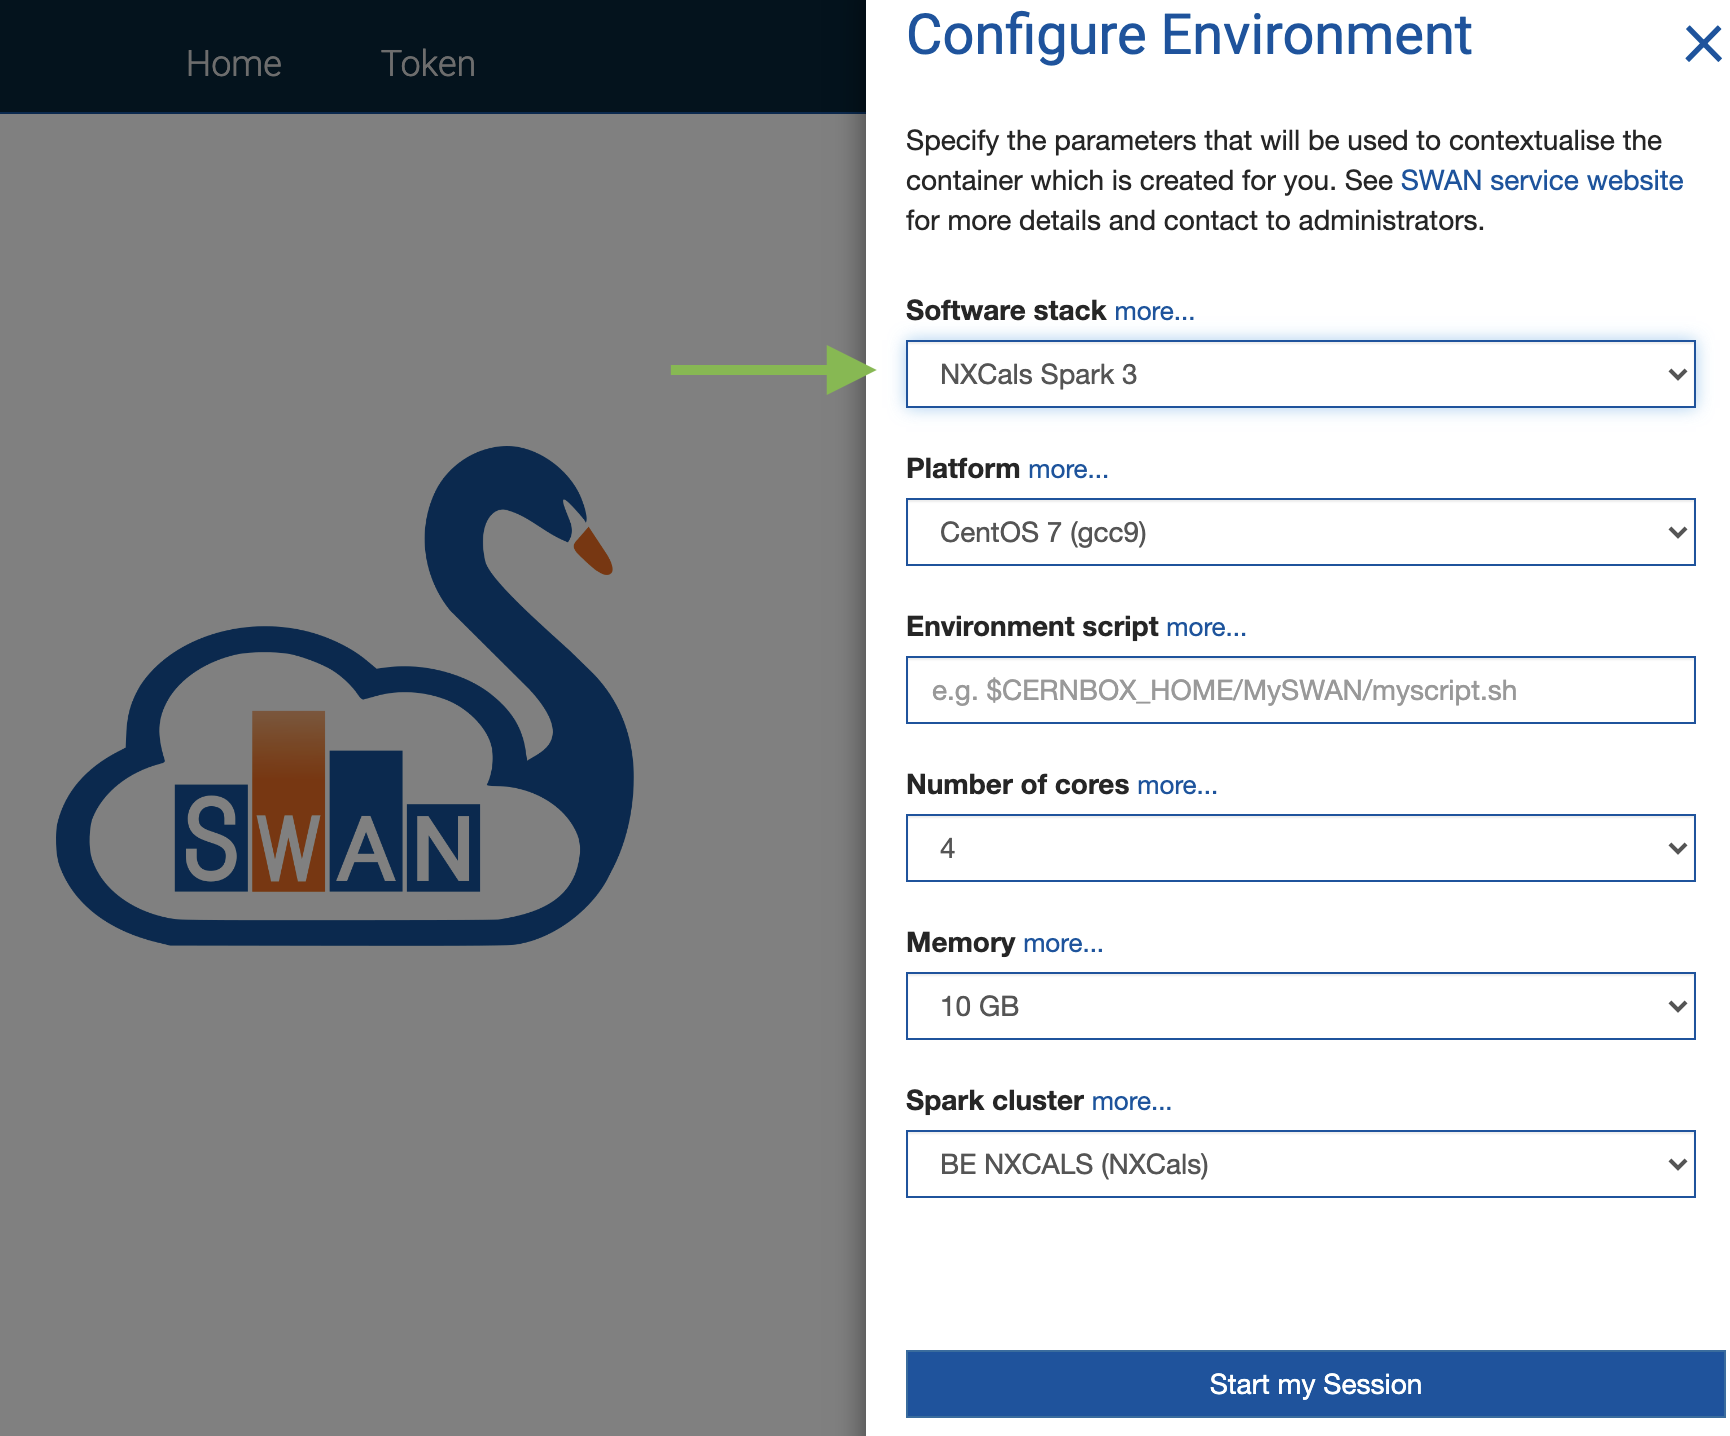 SWAN software stack